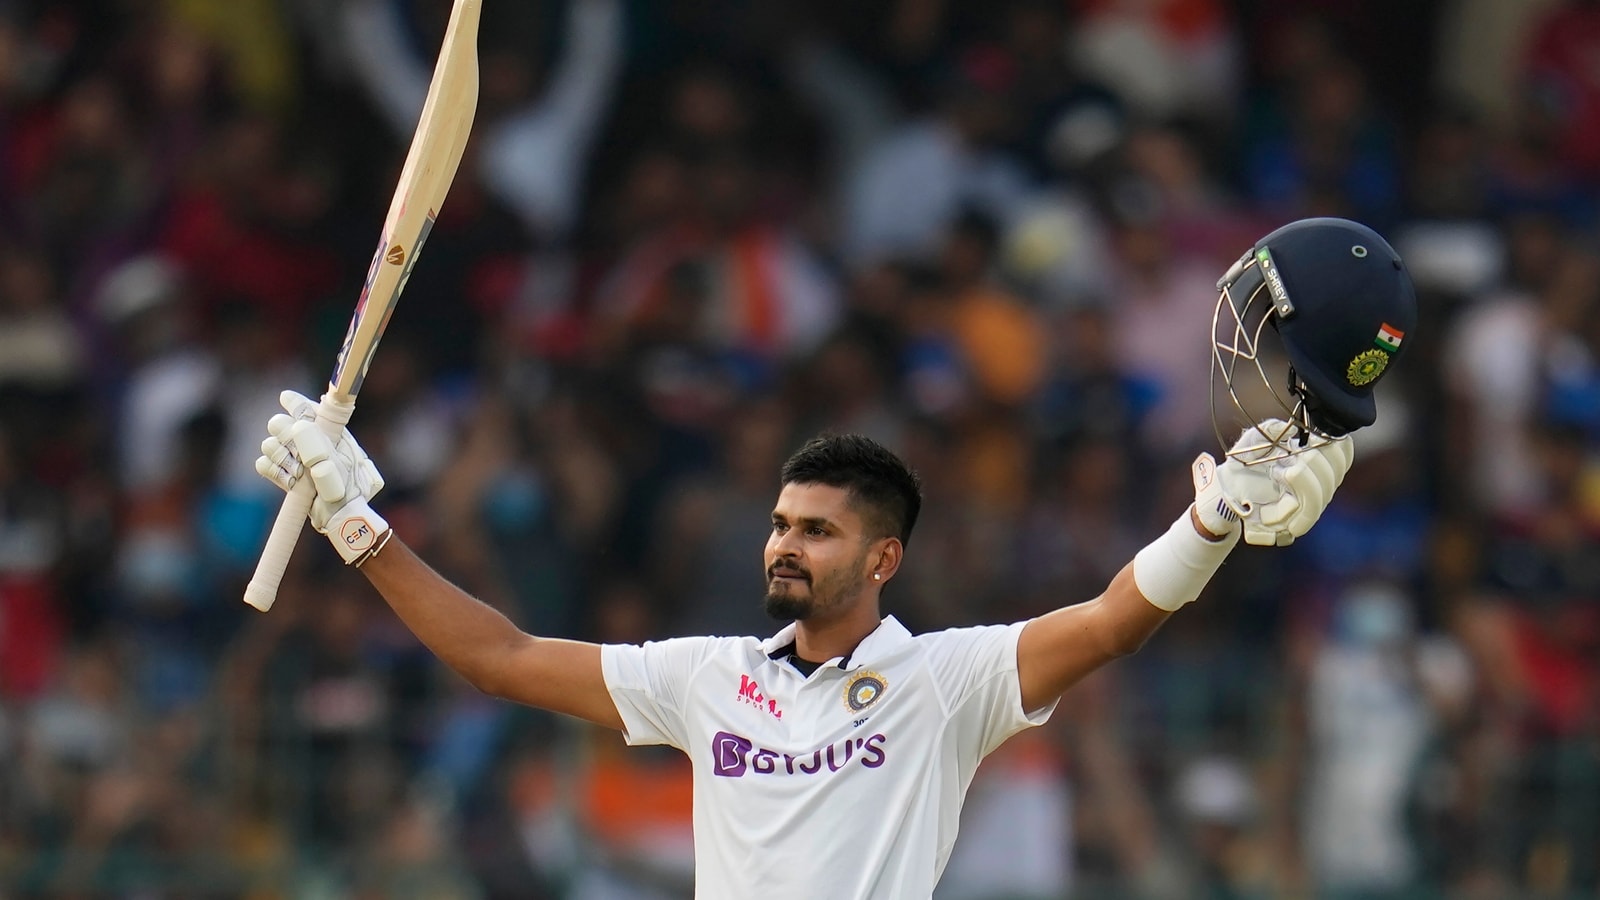 IND vs SL: Shreyas Iyer becomes first Indian batter to achieve sensational  Test record with twin fifties in Bengaluru | Cricket - Hindustan Times